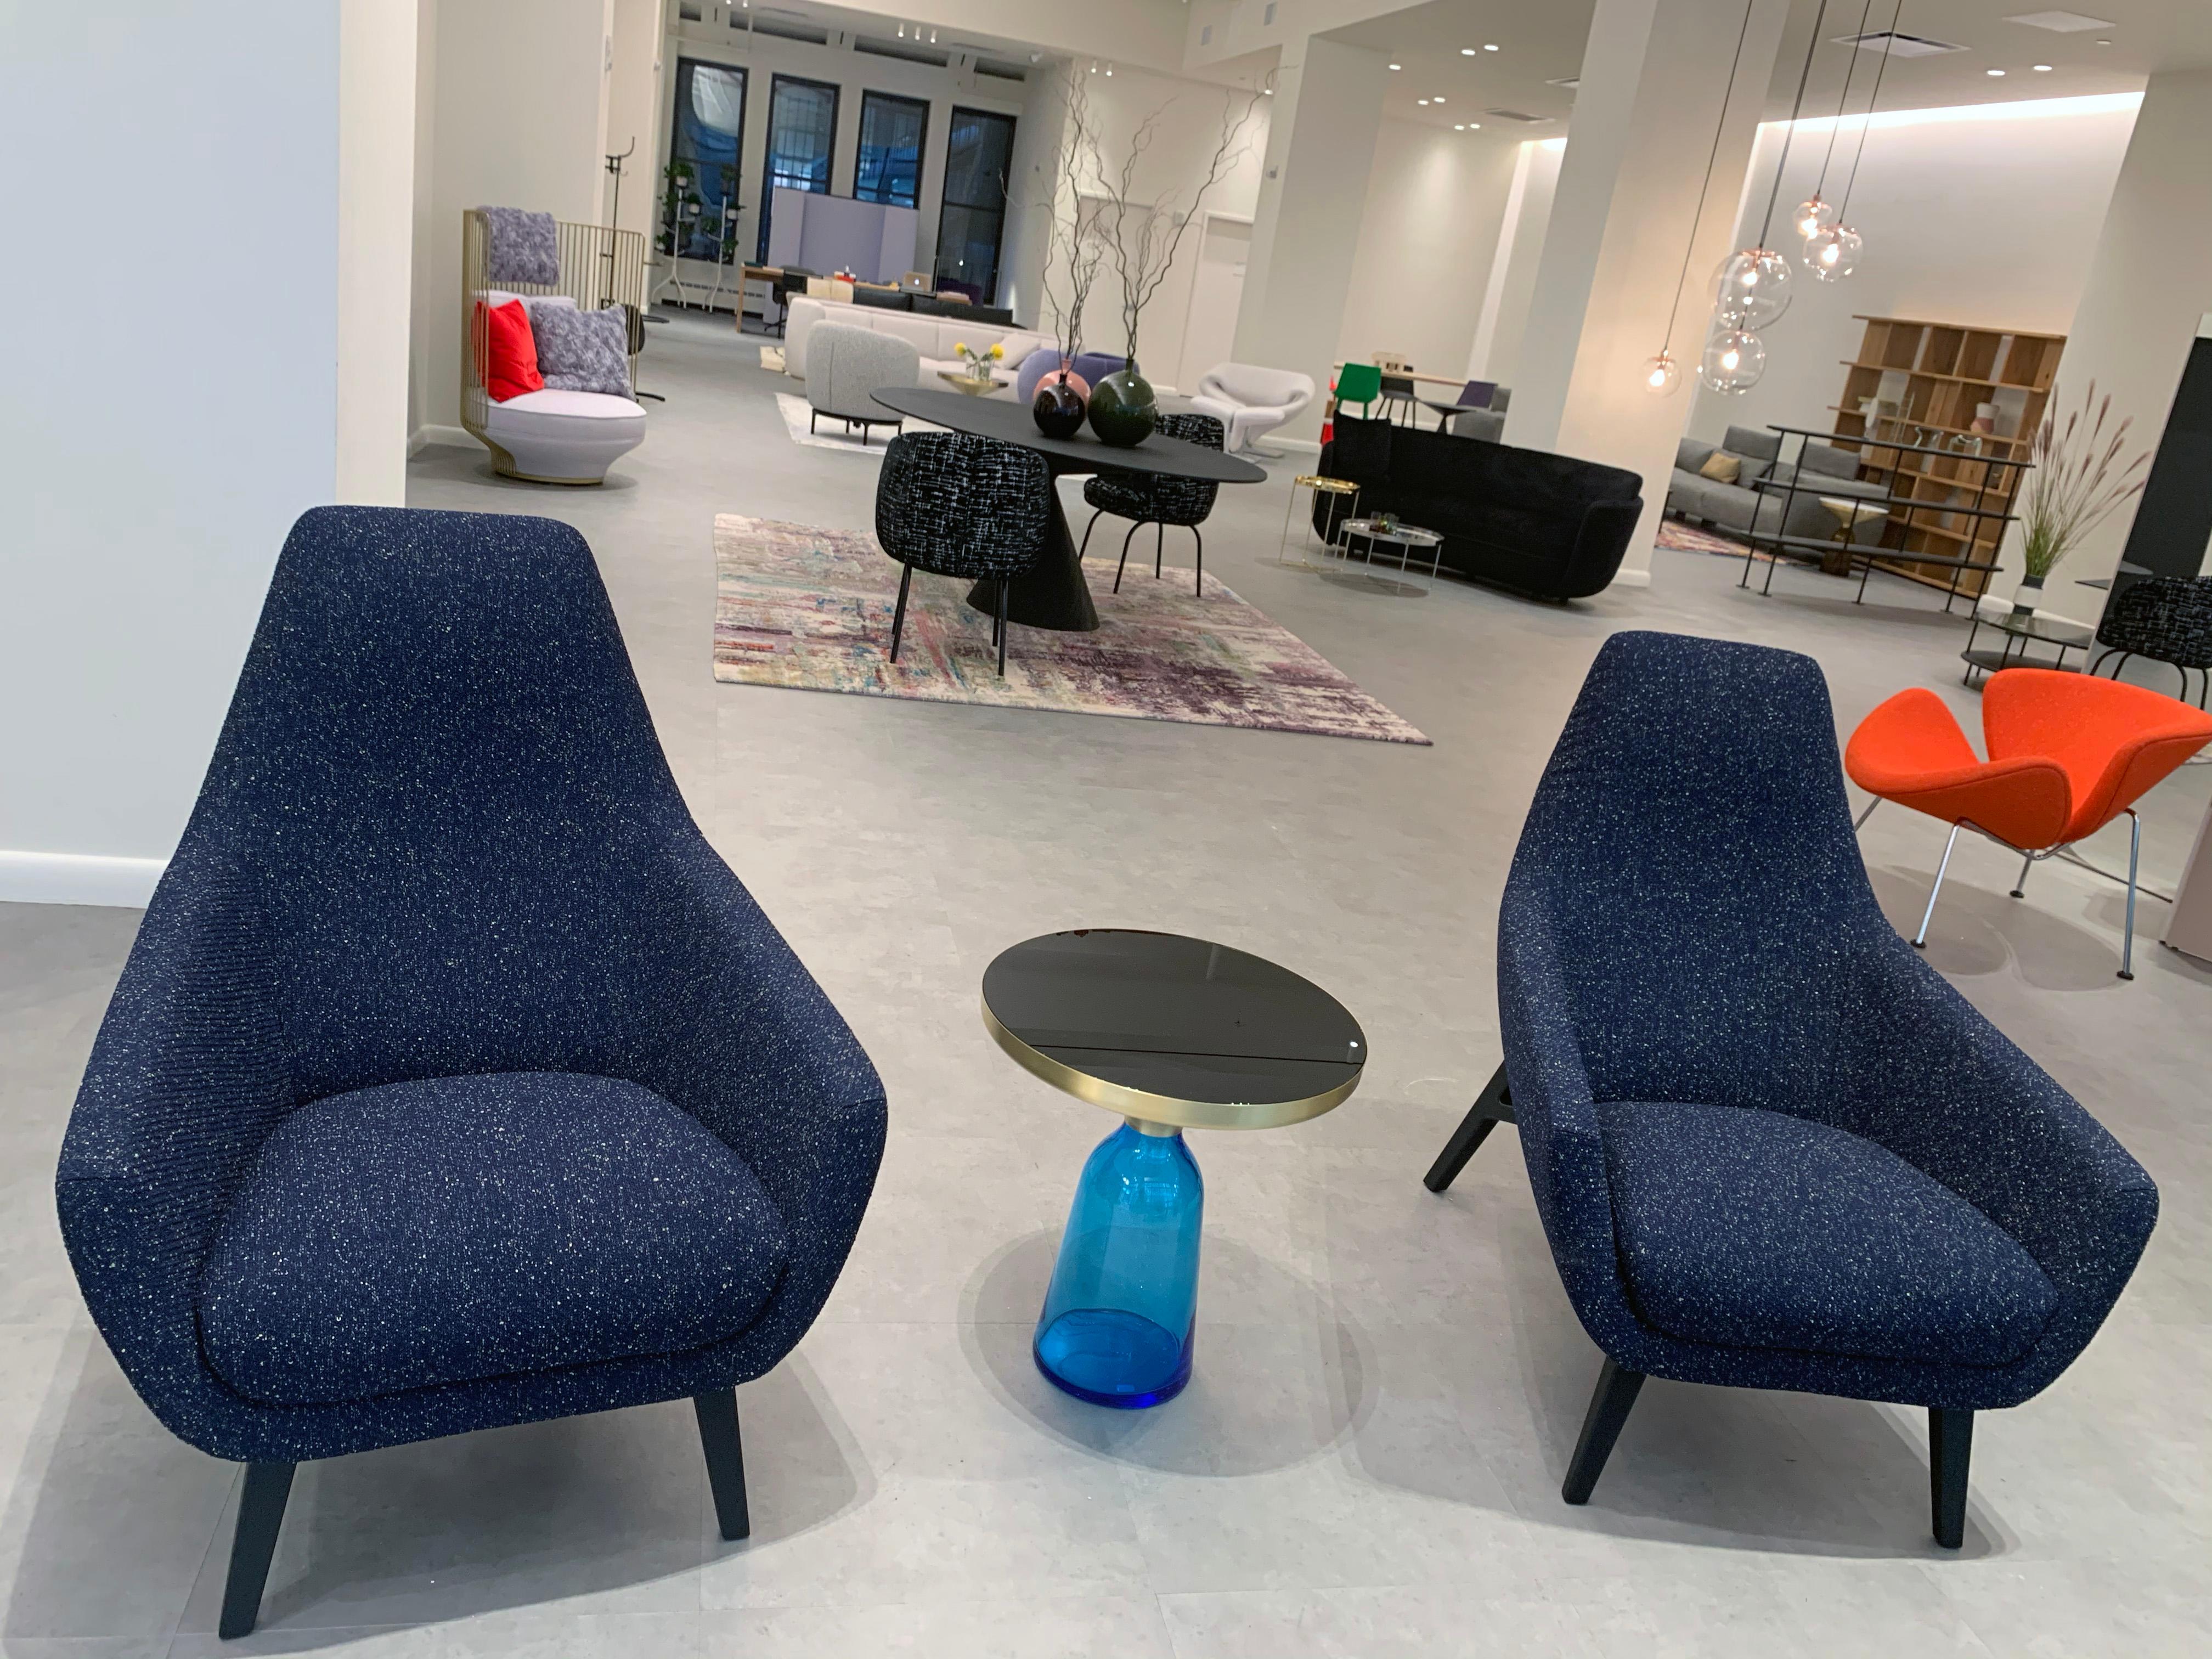 Brand new Enzo lounge chair
The actual color of the fabric is dark blue (see second image)
Upholstered in Kvadrat Pilot by Raf Simons Fabric color #792
Oak legs: black carbon lacquered
Enzo is a comfortable and inviting armchair that is